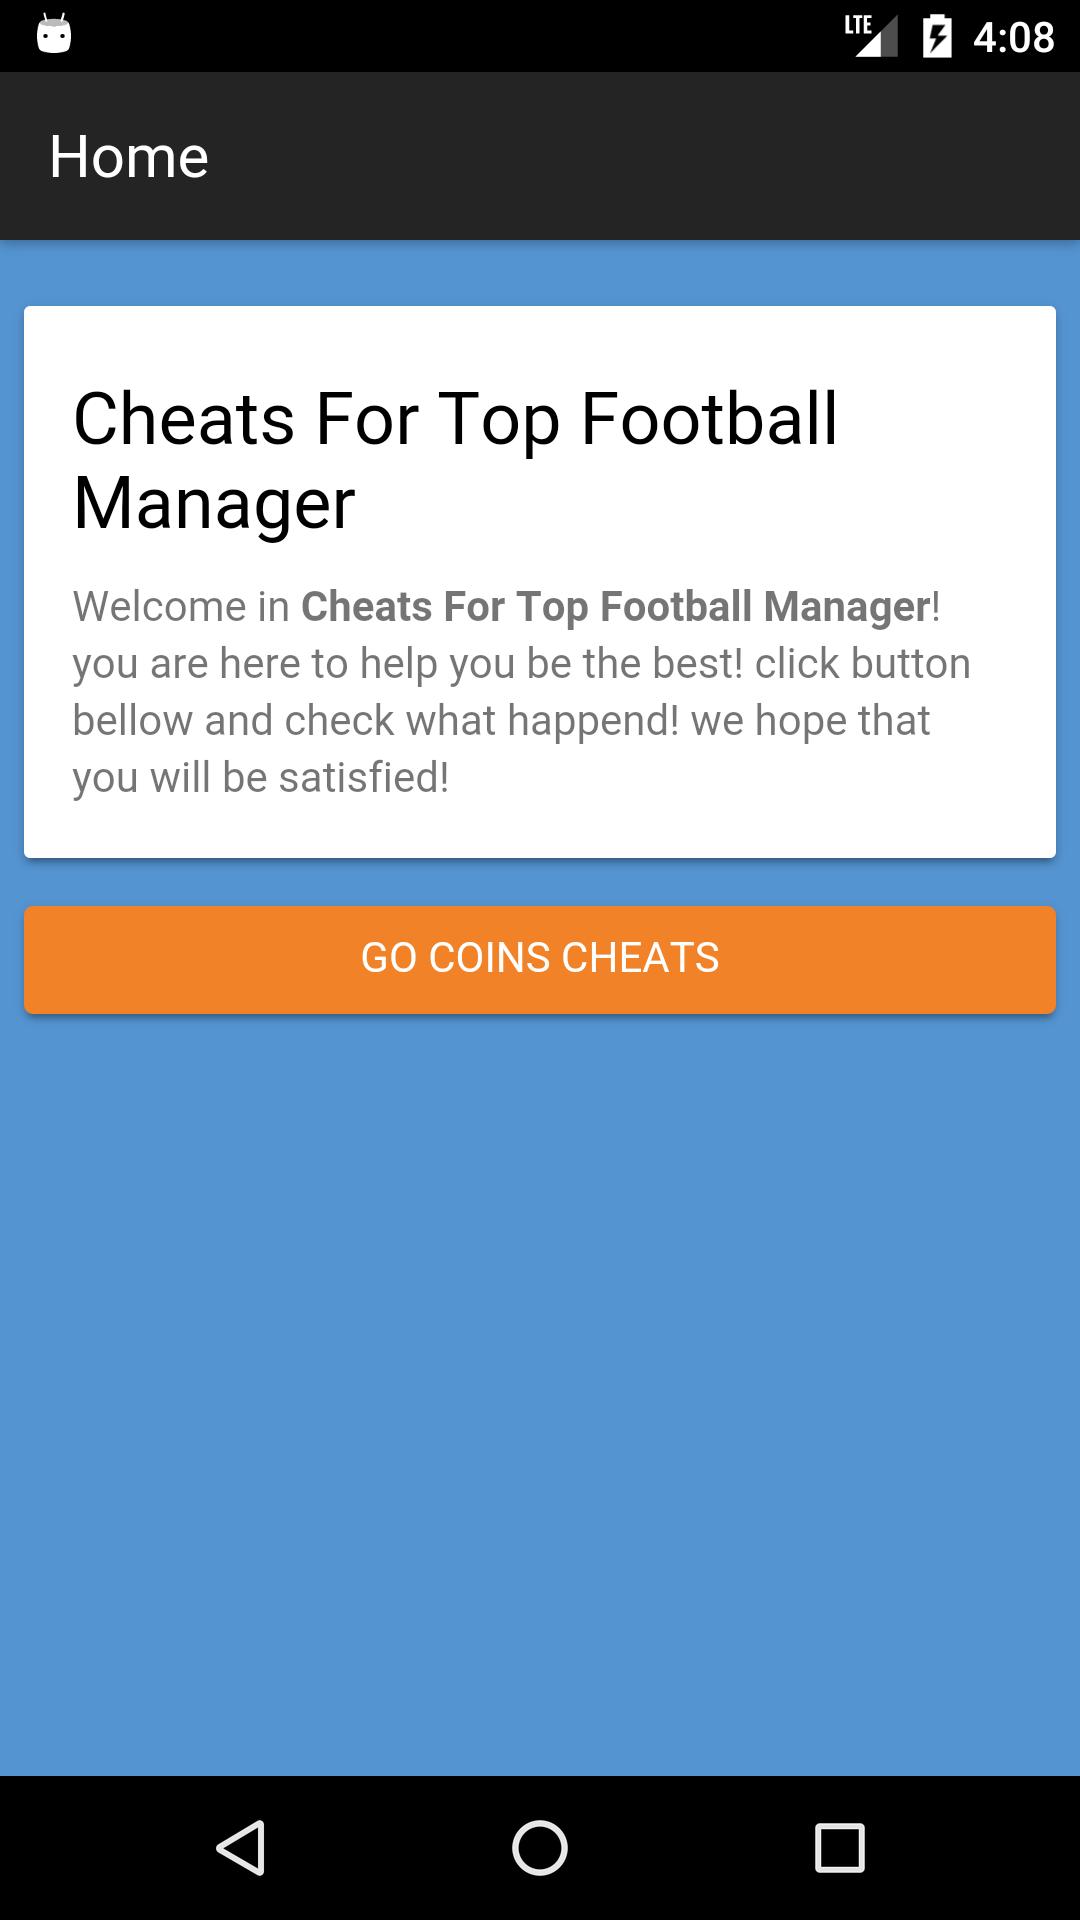 Cheats For Top Football Manager for Android - APK Download